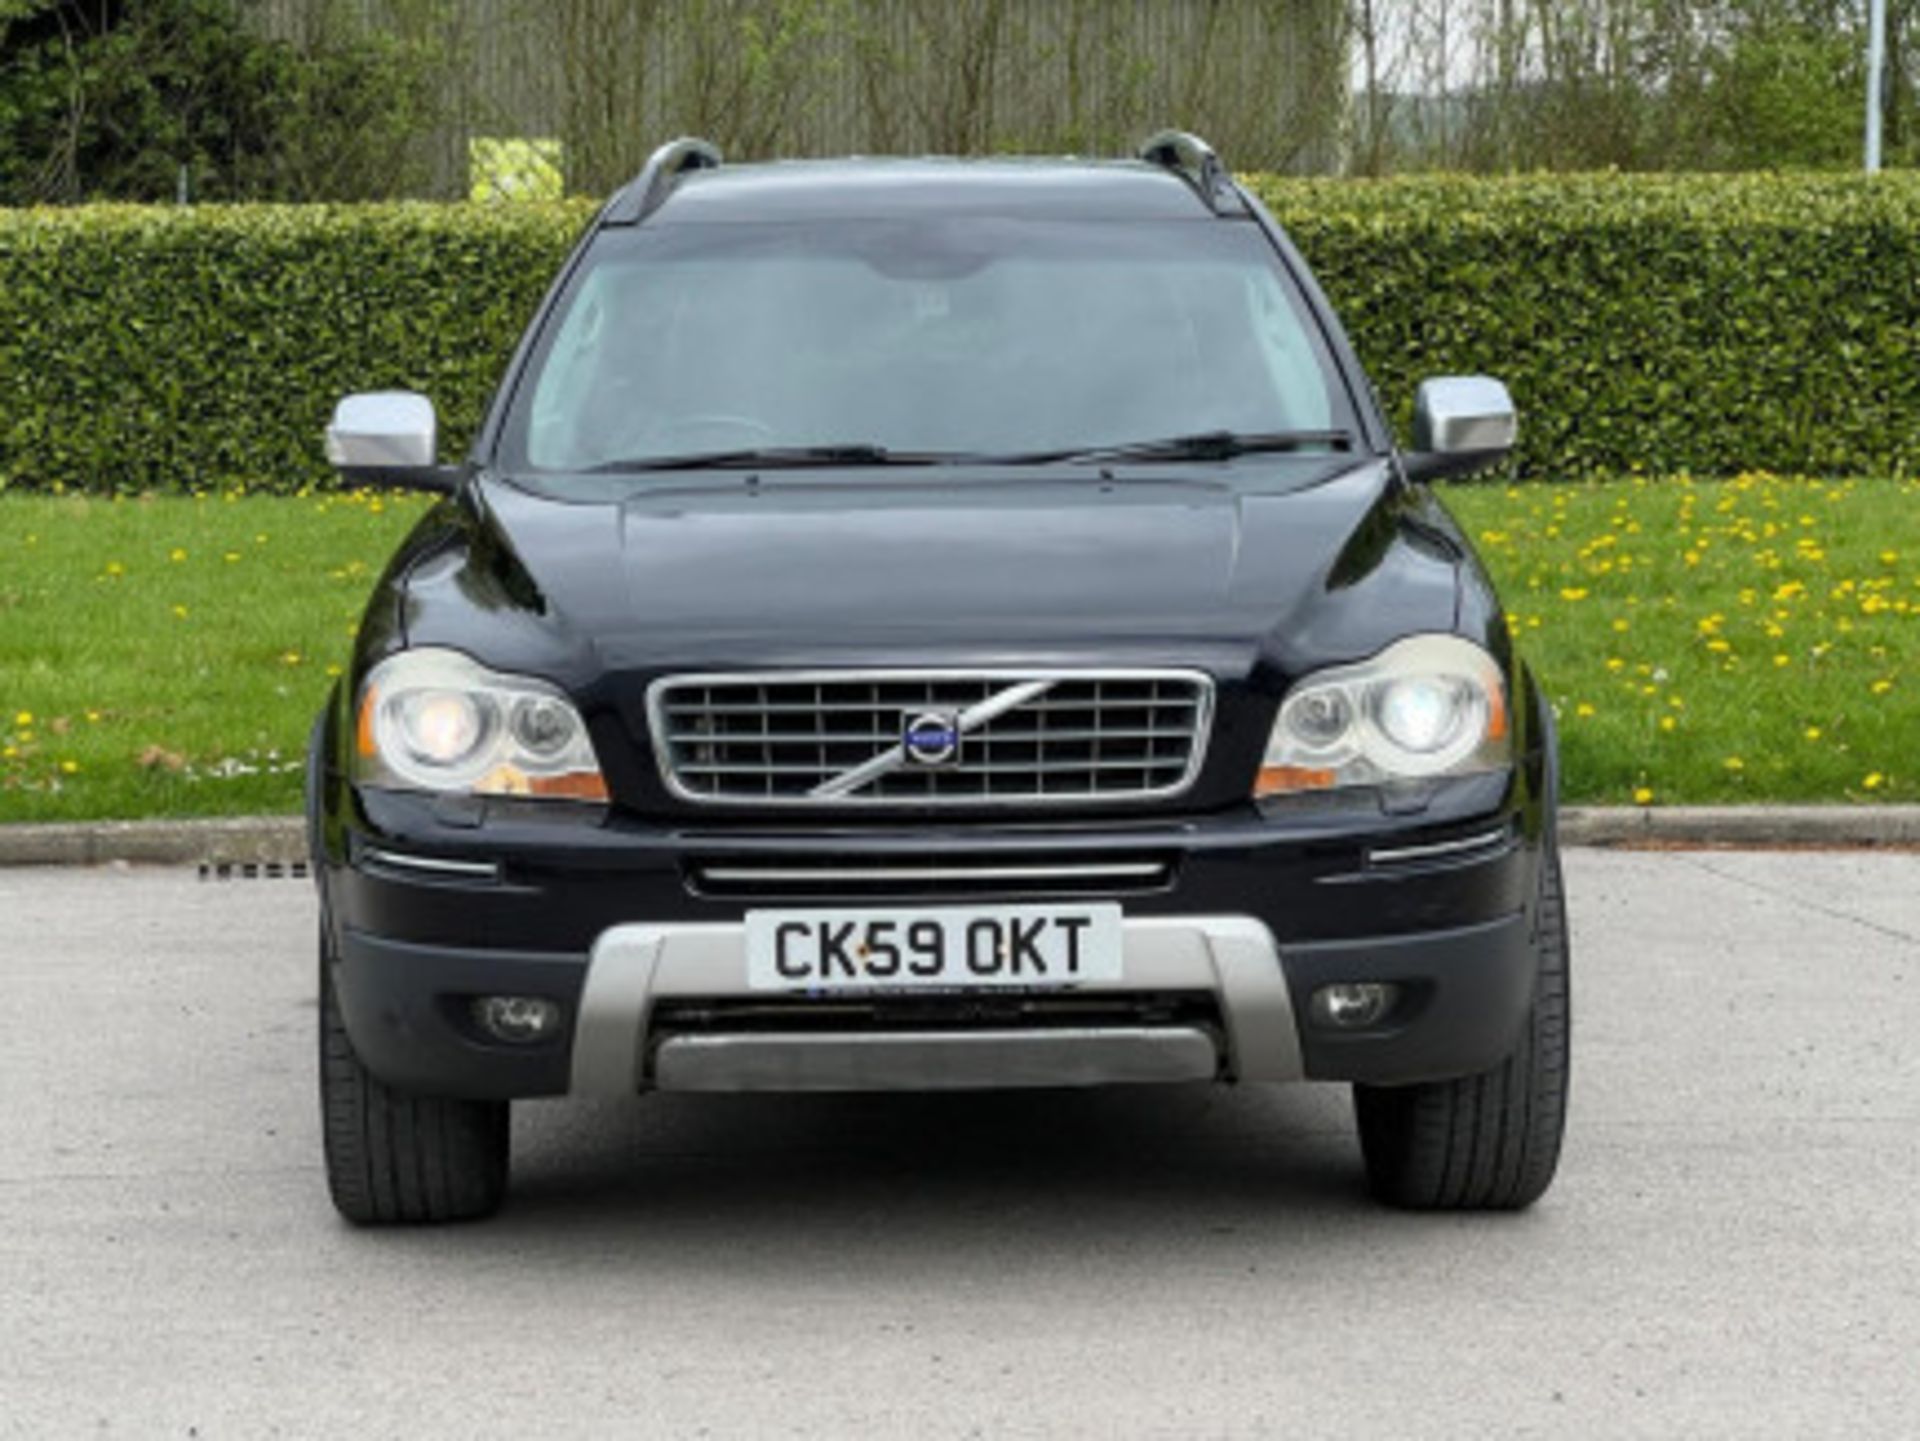 VOLVO XC90 2.4 D5 EXECUTIVE GEARTRONIC AWD, 5DR >>--NO VAT ON HAMMER--<< - Image 65 of 136